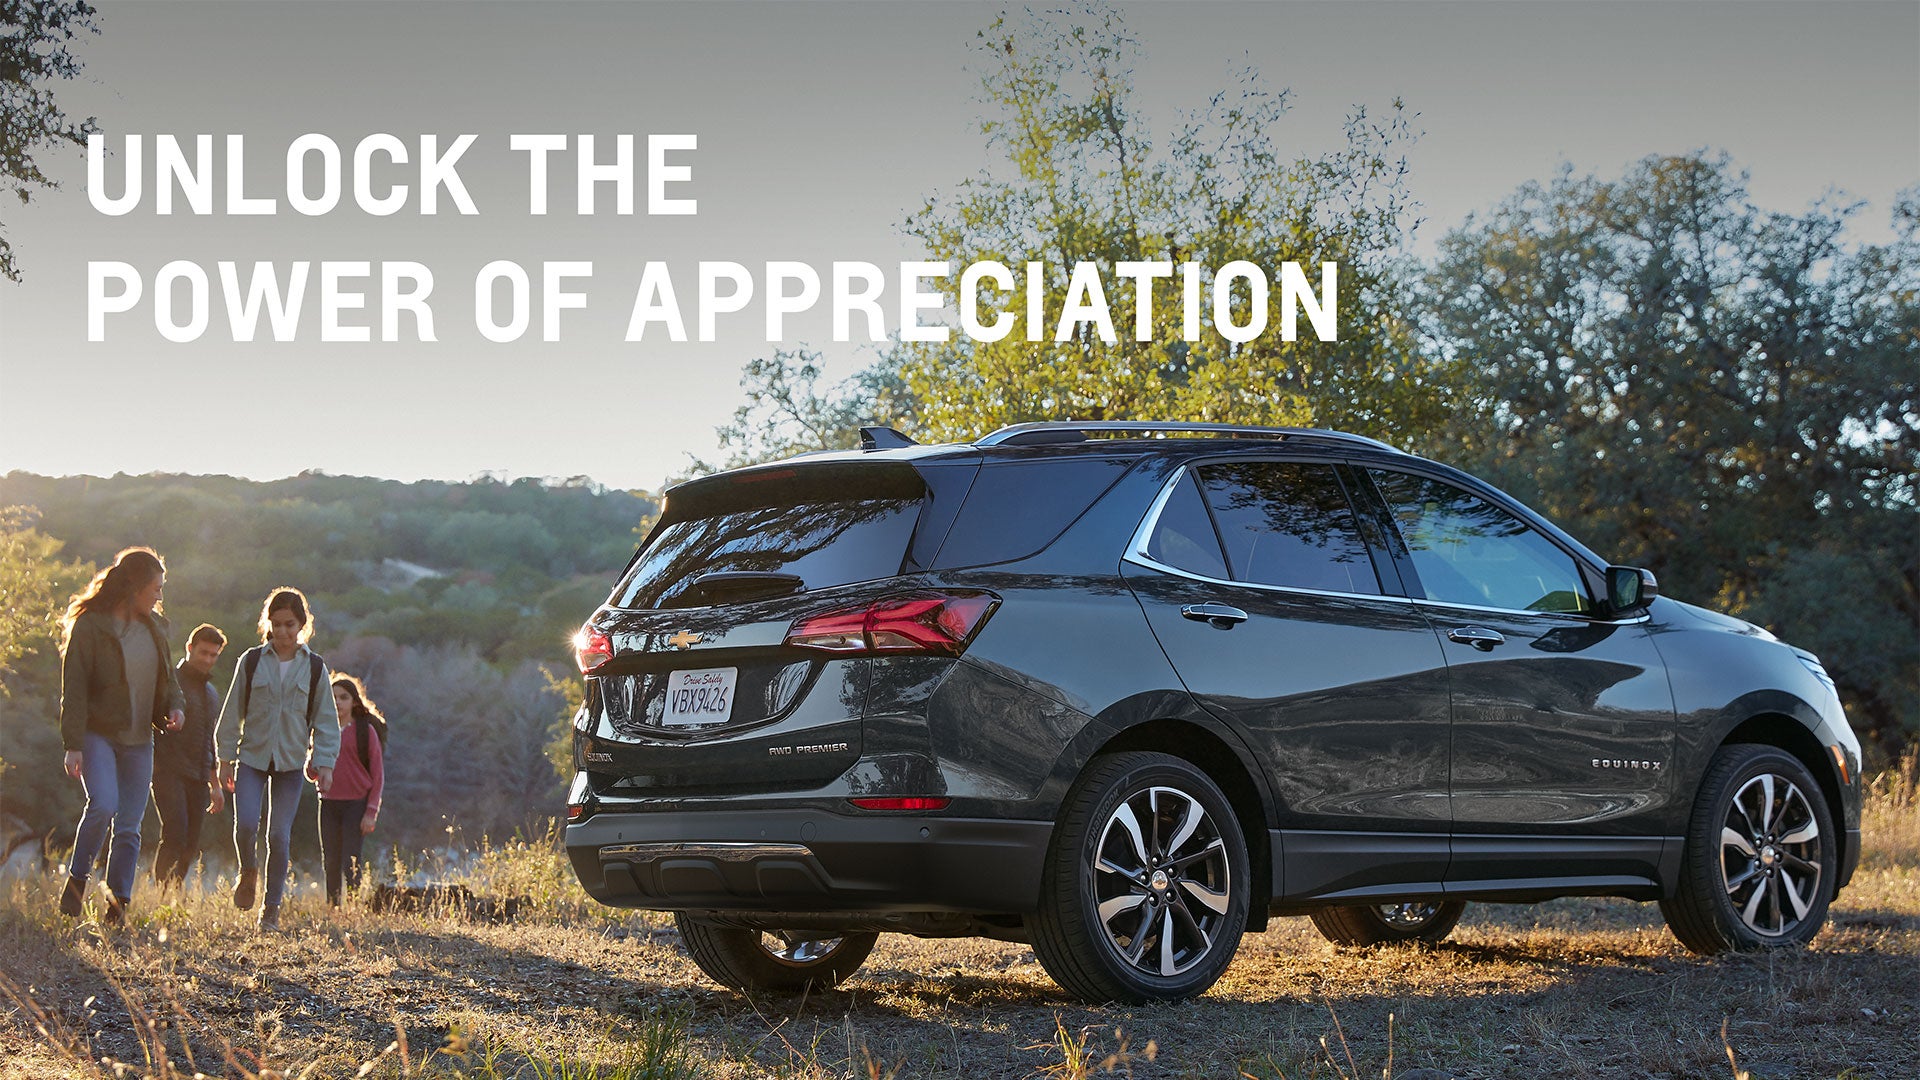 Unlock the power of appreciation | Cole Valley Chevrolet in Newton Falls OH